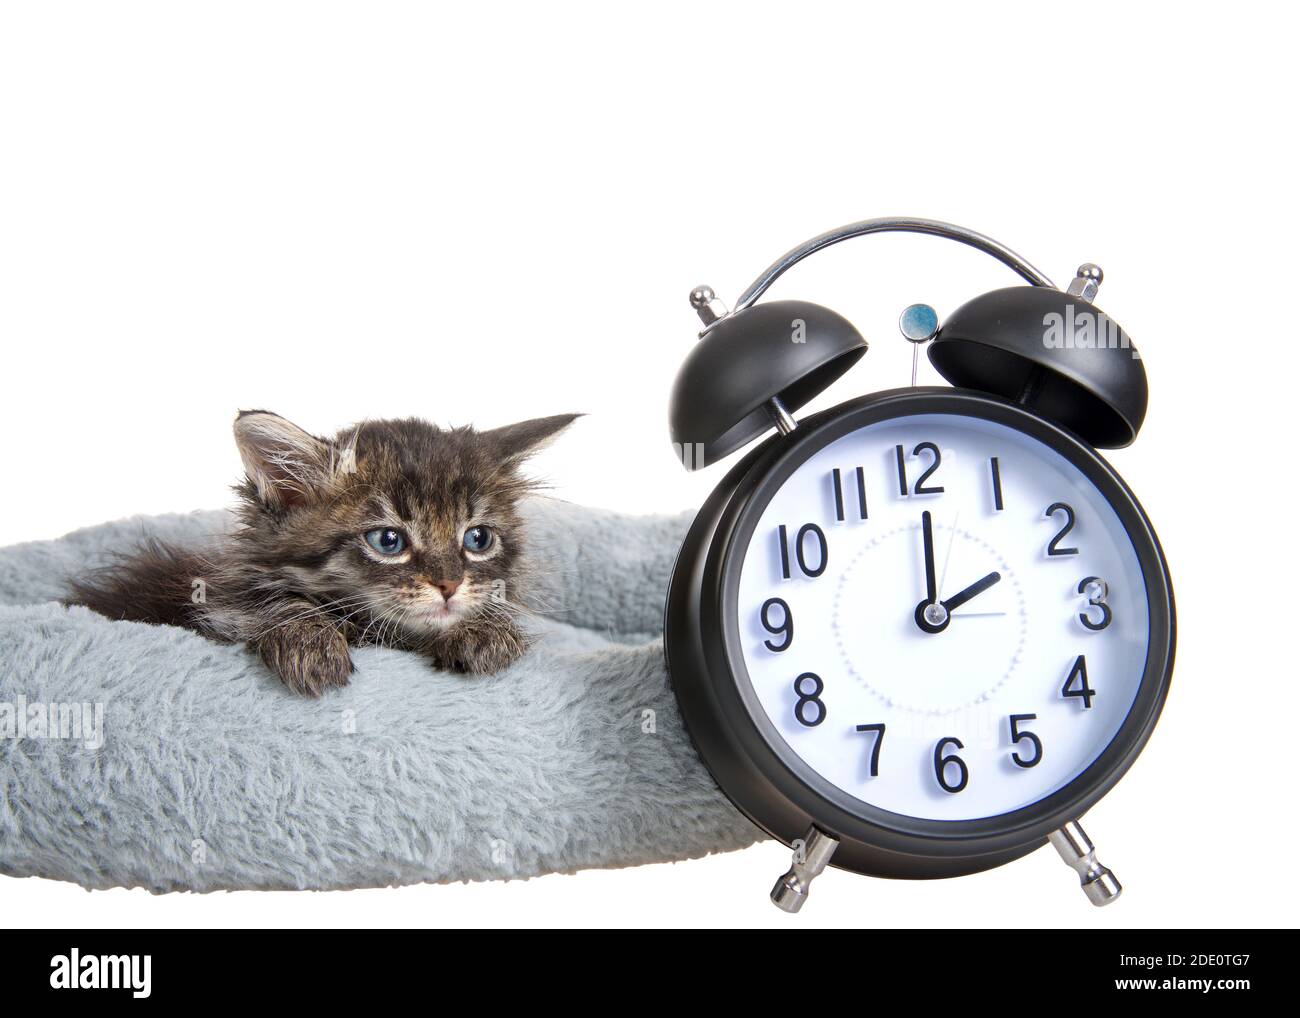 Tired tiny tabby kitten laying in a grey bed with paws over edge looking at old fashioned alarm clock set to 2 o'clock. Daylight savings concept. Spri Stock Photo